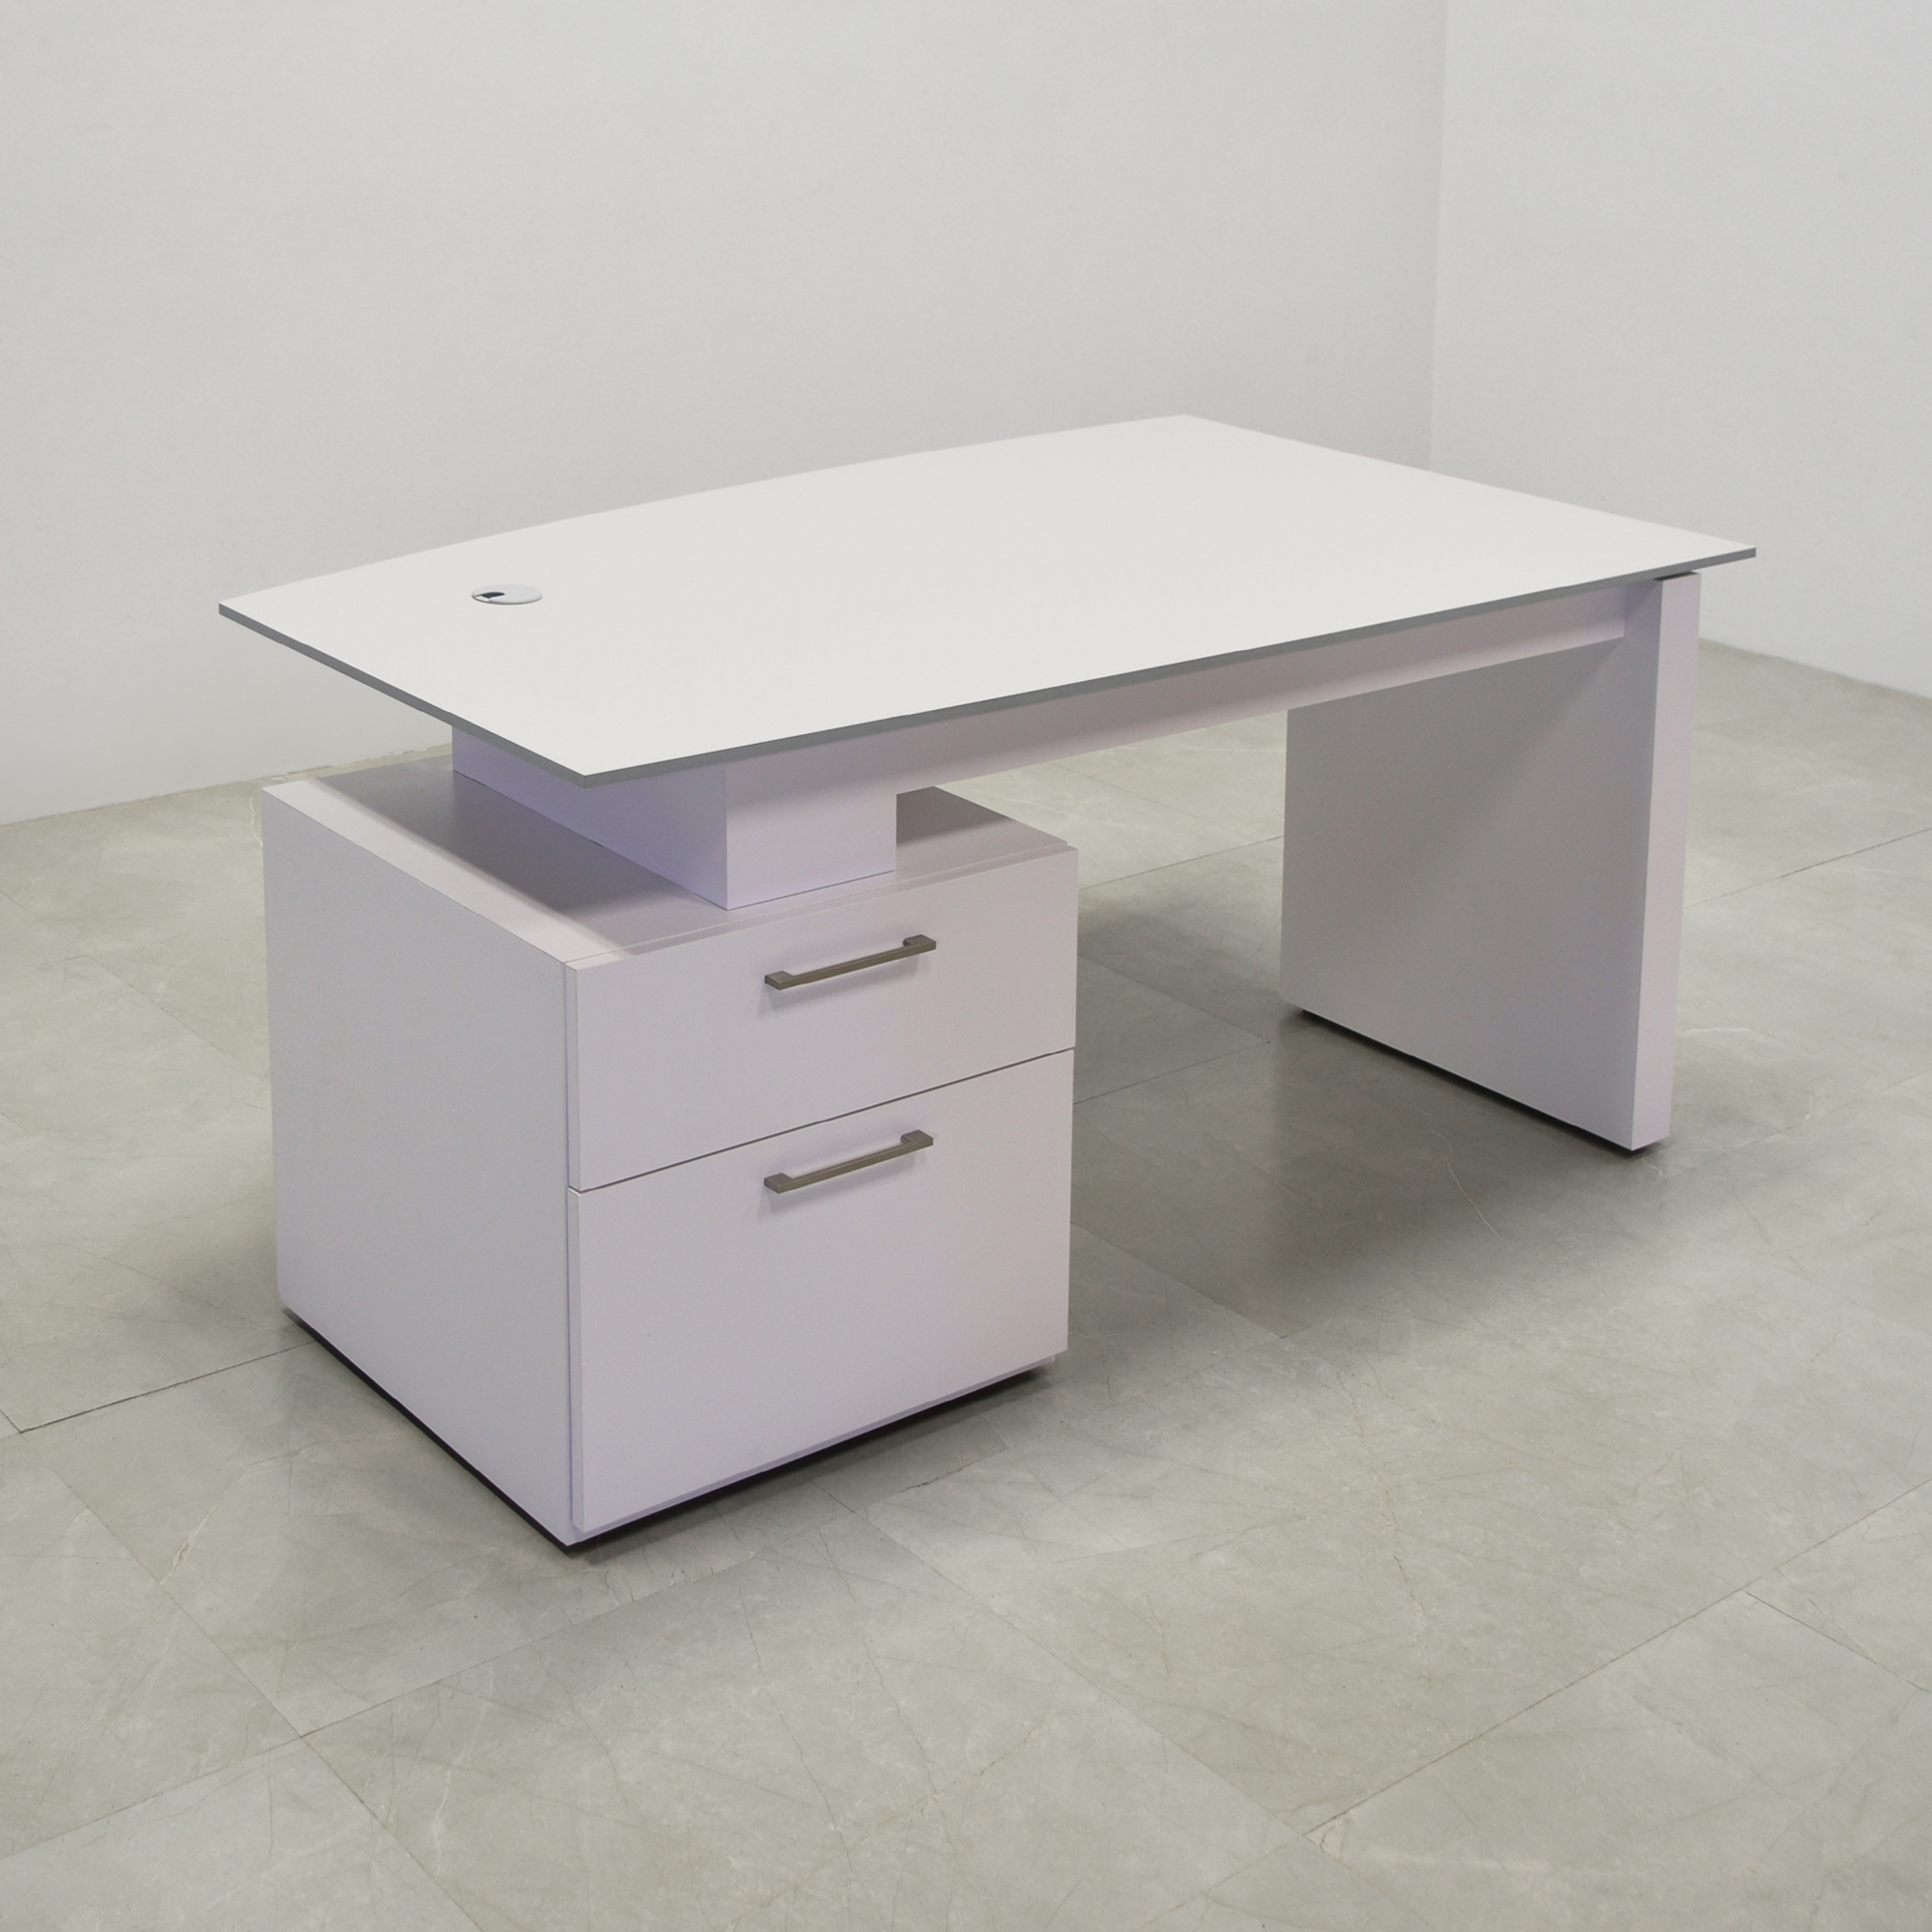 Avenue Curved Executive Desk With Engineered Stone Top in gray stone (discontinued) and white matte laminate base & storage shown here.